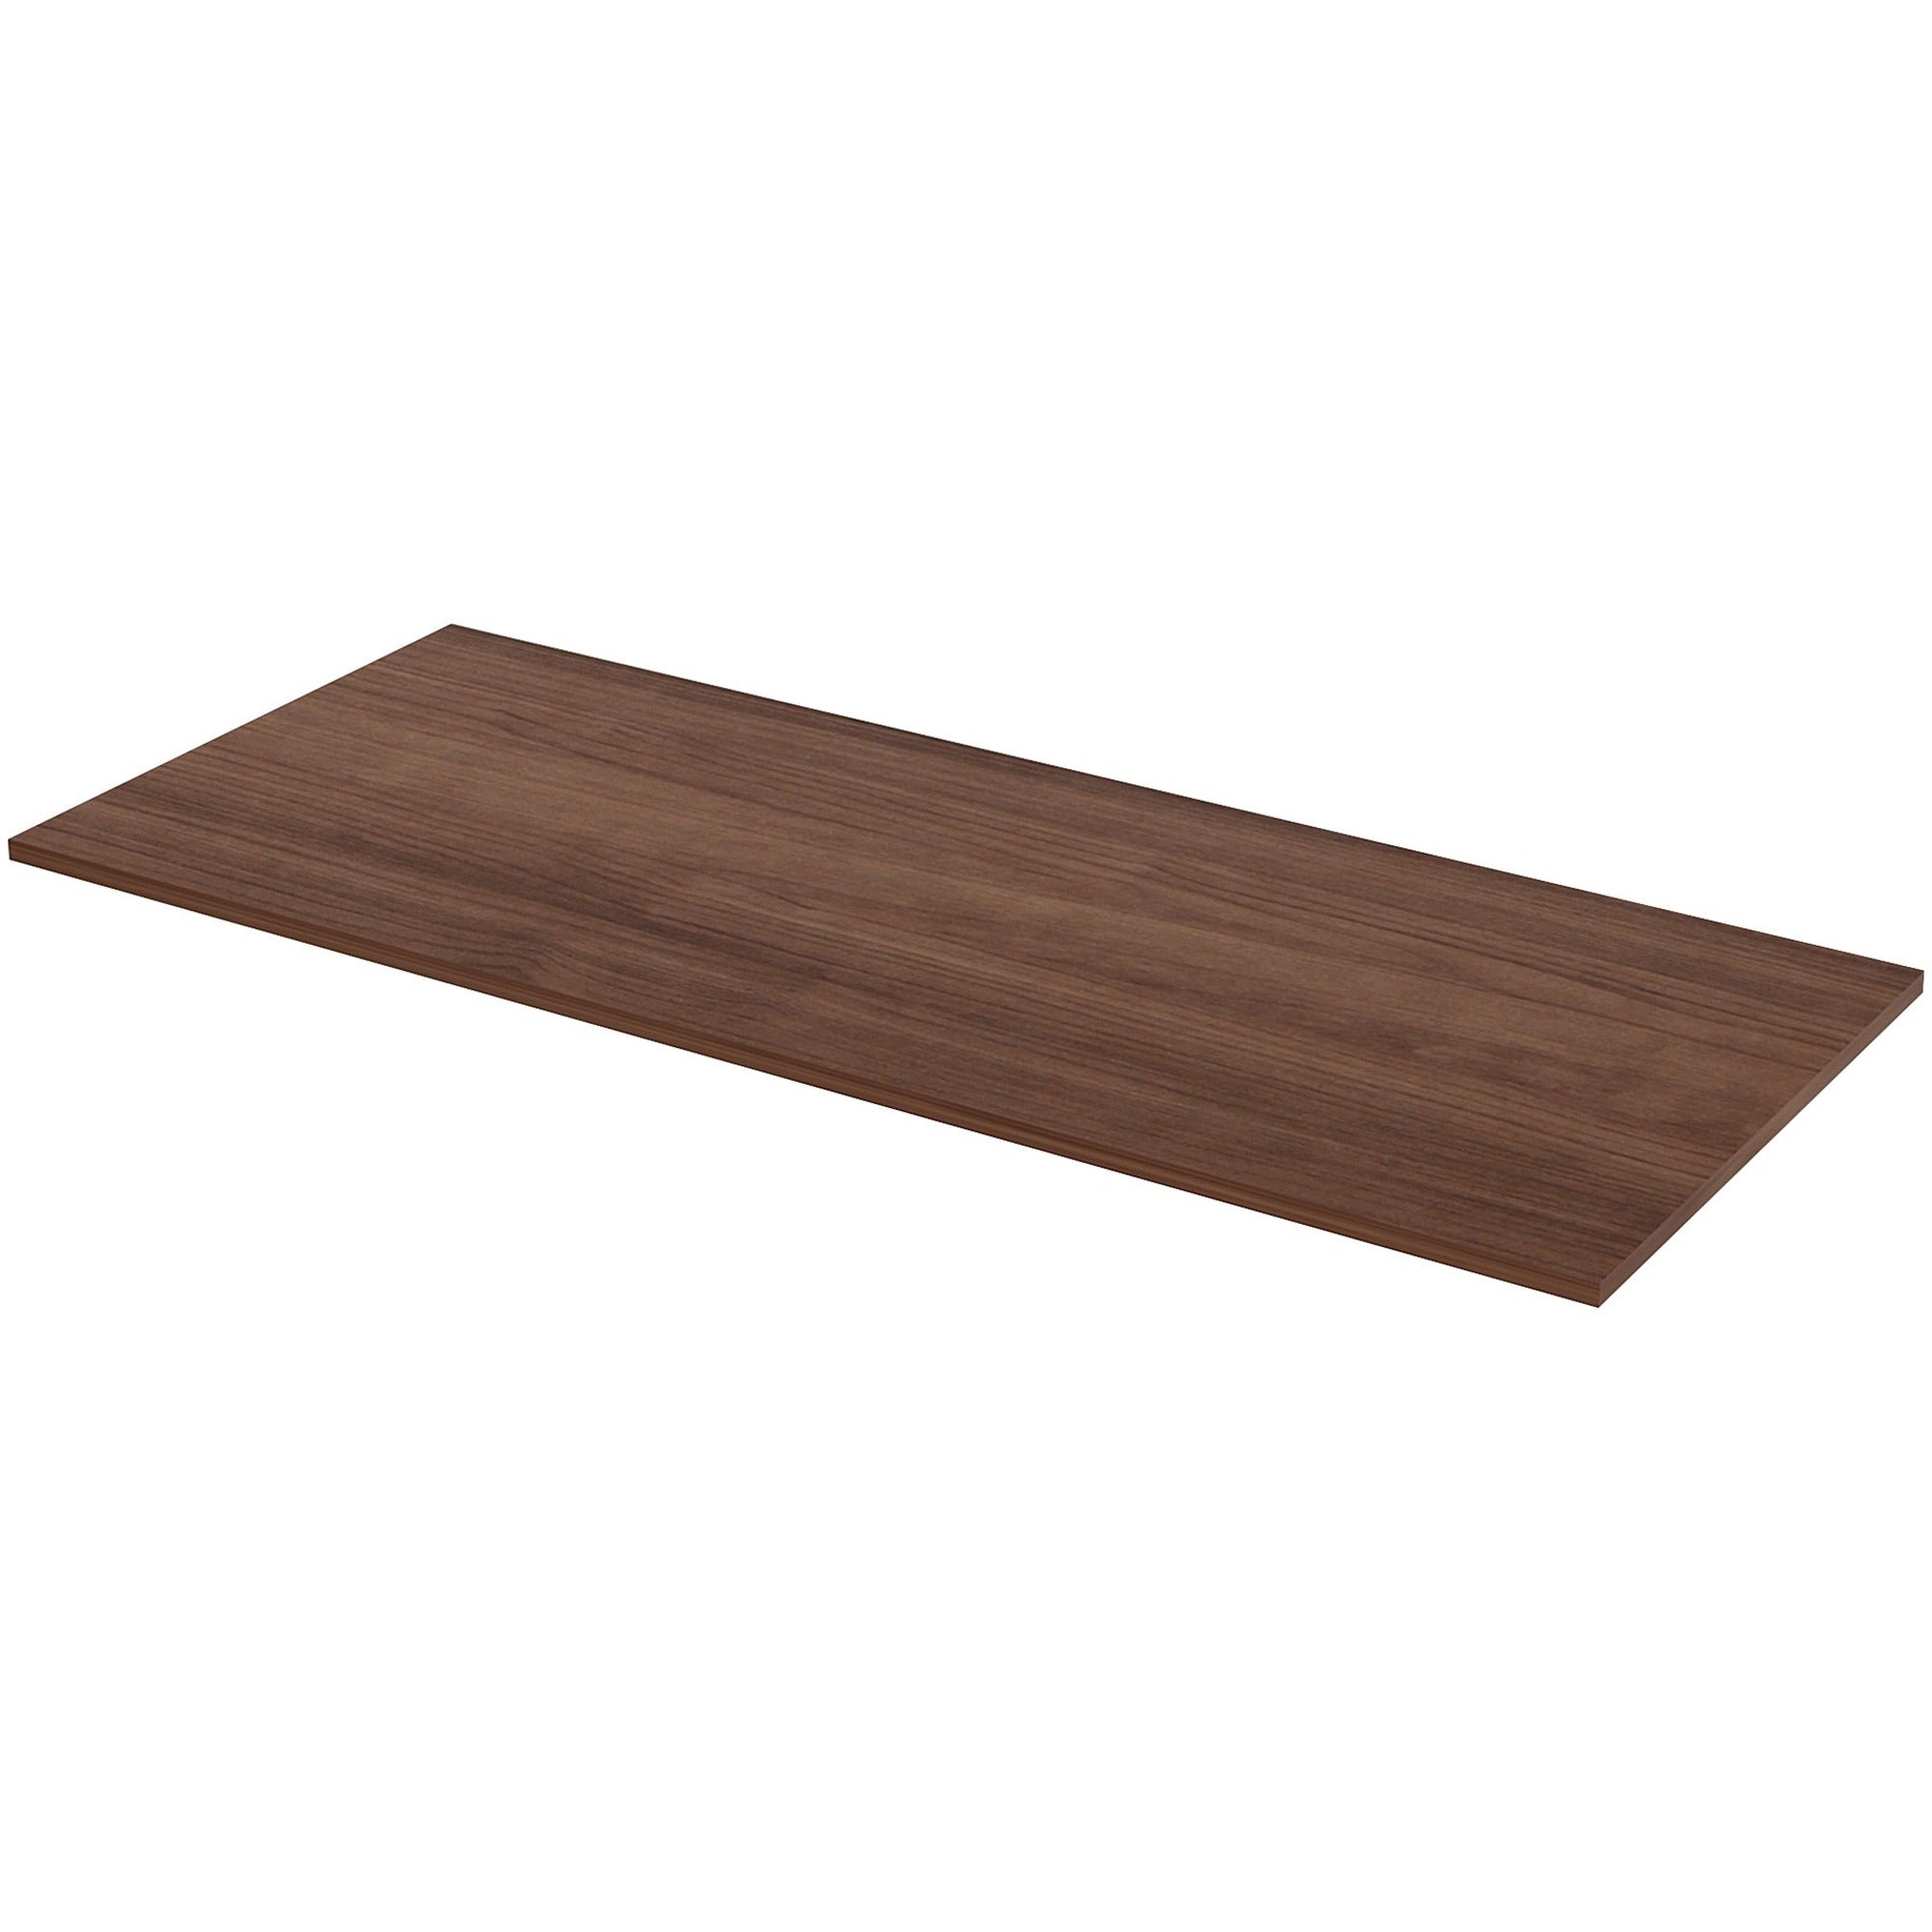 lorell-relevance-series-tabletop-for-table-topwalnut-rectangle-laminated-top-adjustable-height-x-72-table-top-width-x-30-table-top-depth-x-1-table-top-thickness-assembly-required-1-each_llr34407 - 1